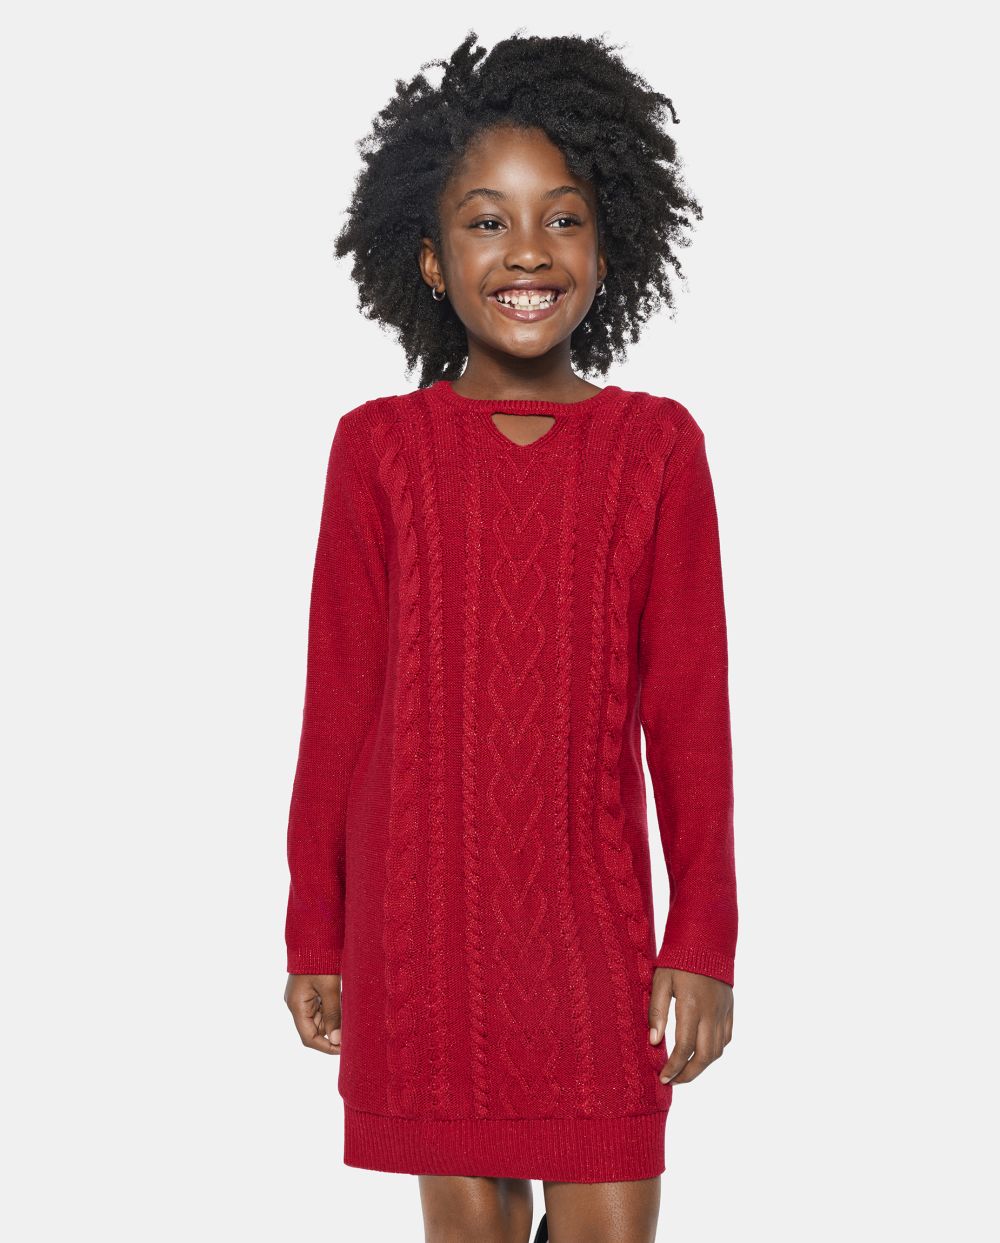 Girls Crew Neck Above the Knee Cutout Sweater Long Sleeves Dress